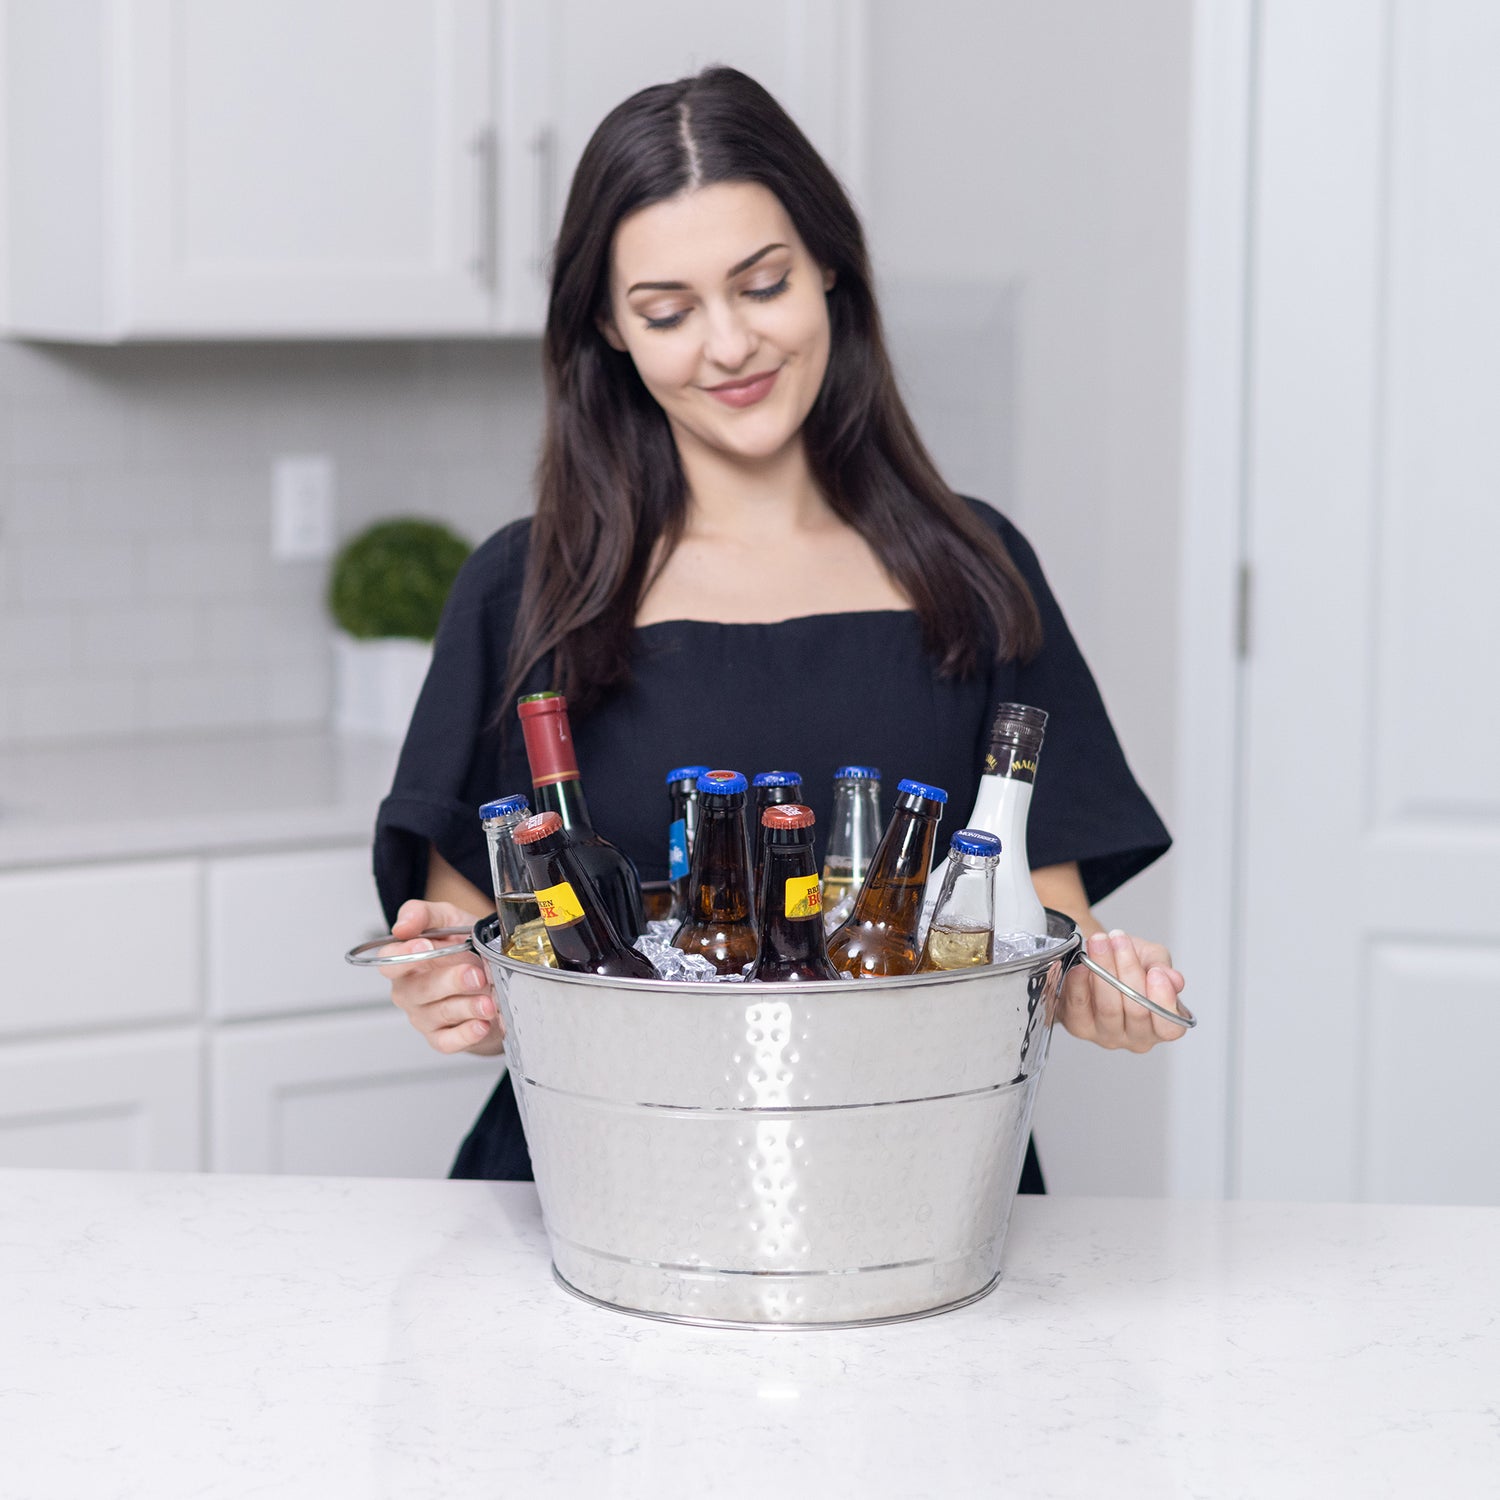 Metal gift basket that can be personalized for a wedding, anniversary, or housewarming gift.  Perfect for use as a wine bucket or use to chill champagne, beers, or water.  Put it all on ice!